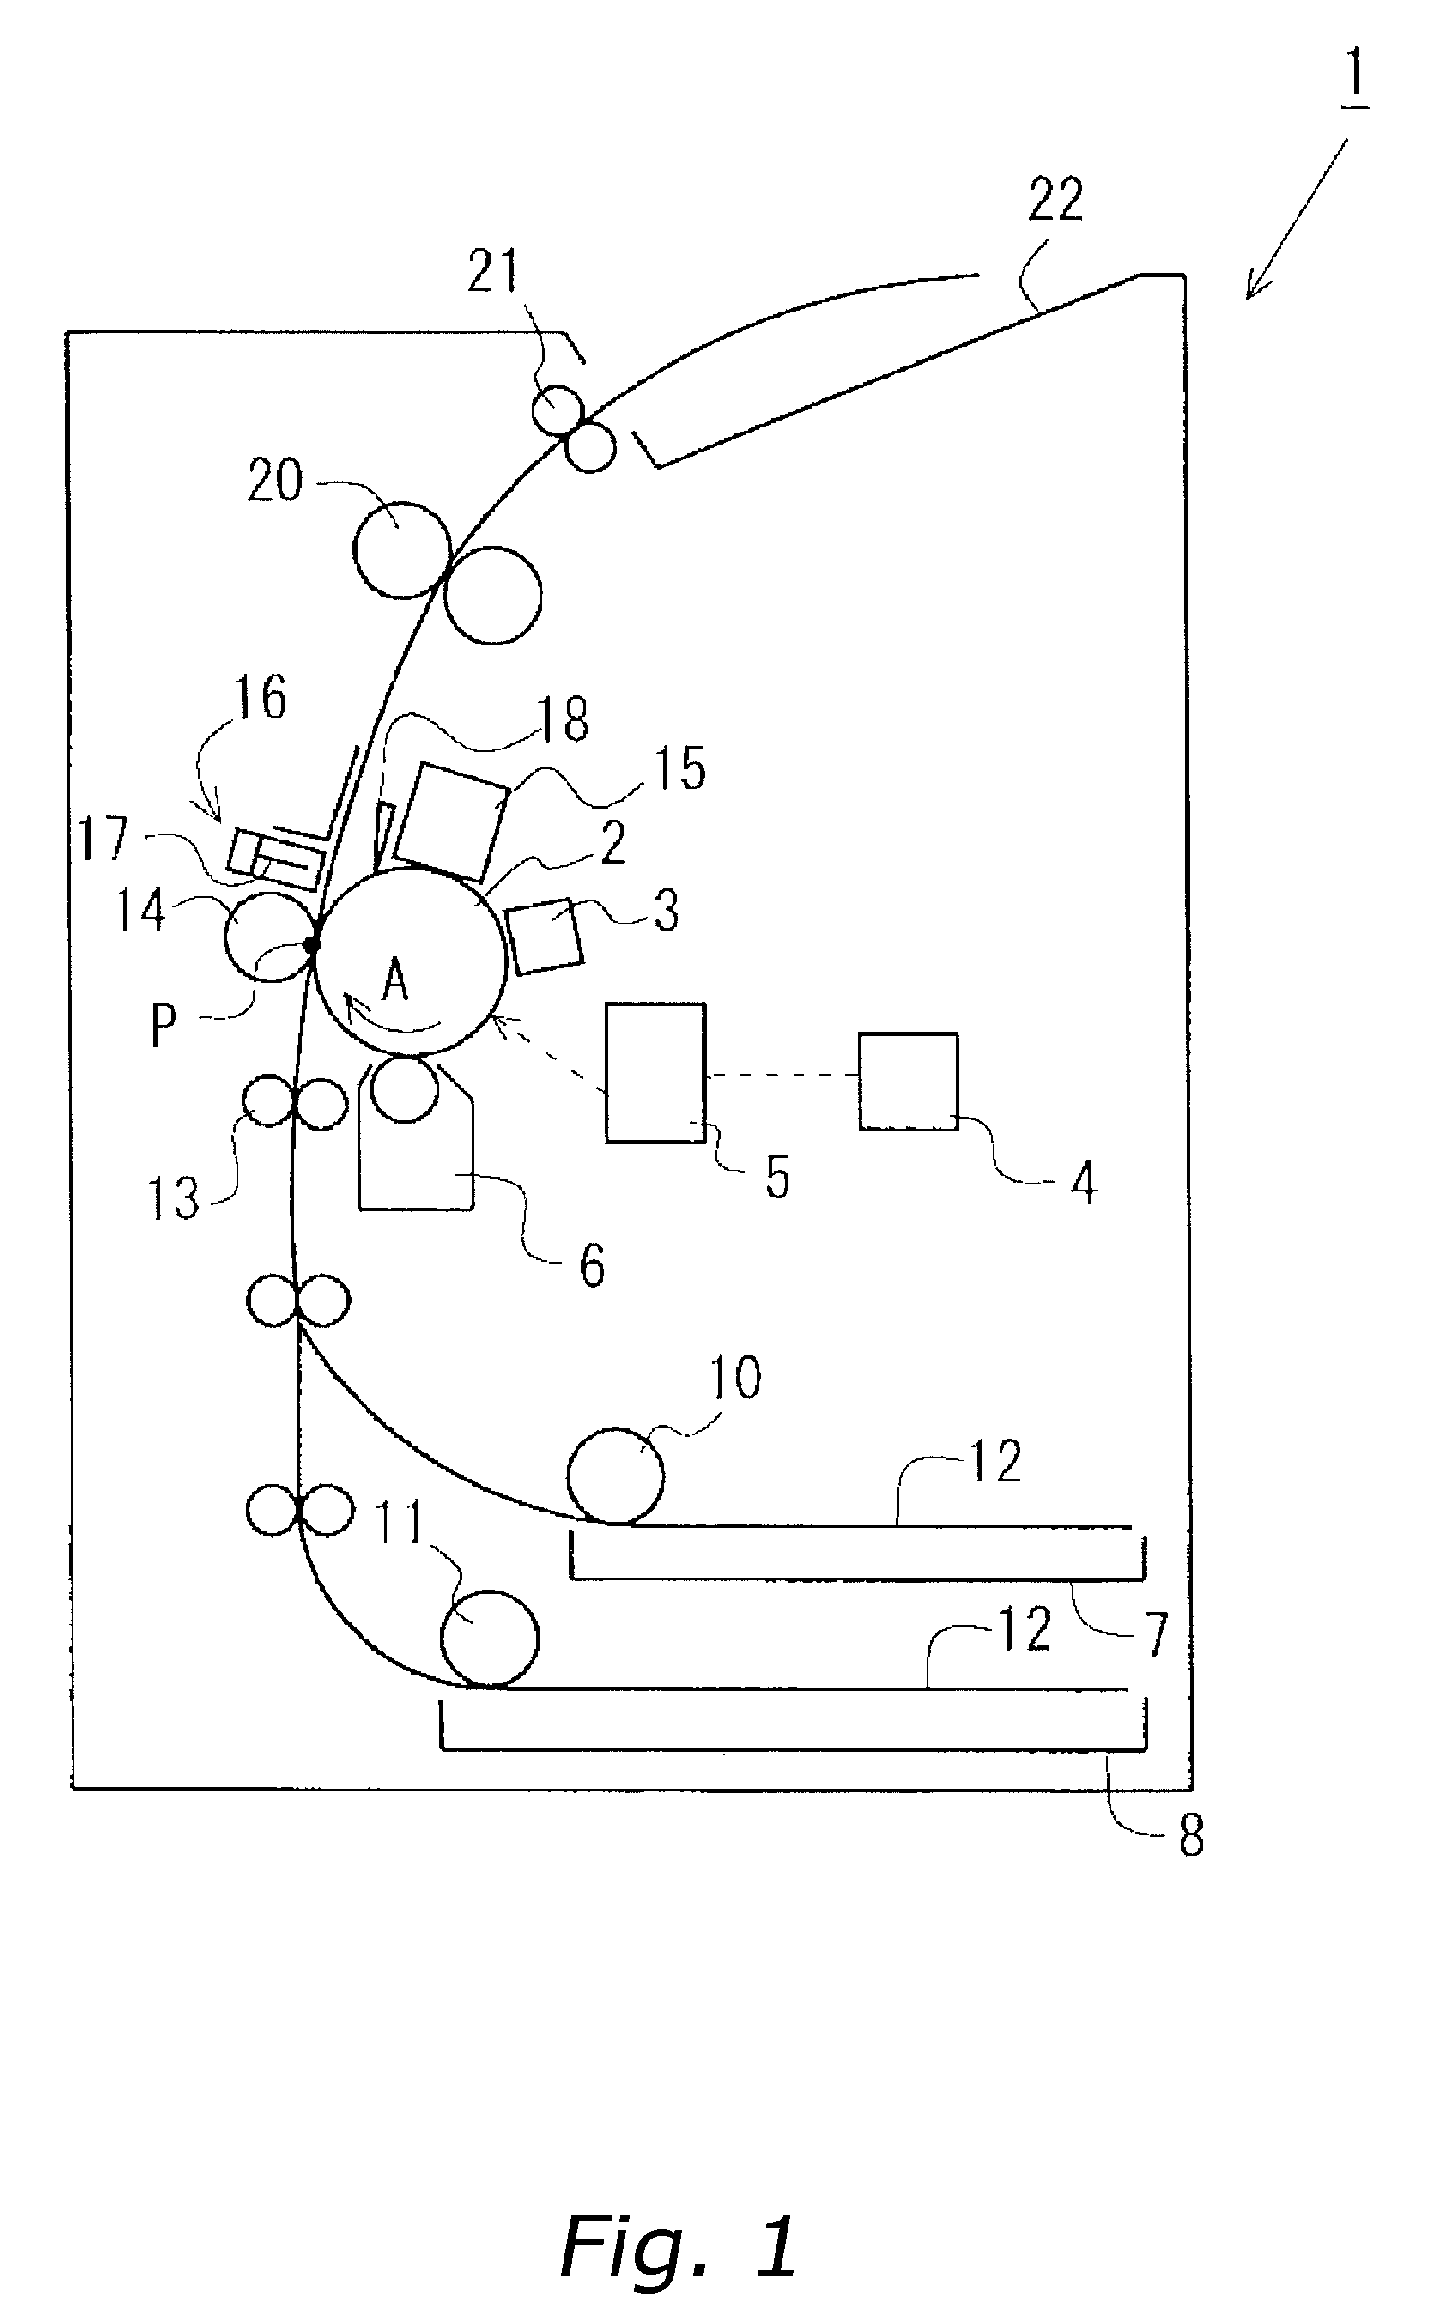 Image forming device having a conductive member with separation needles